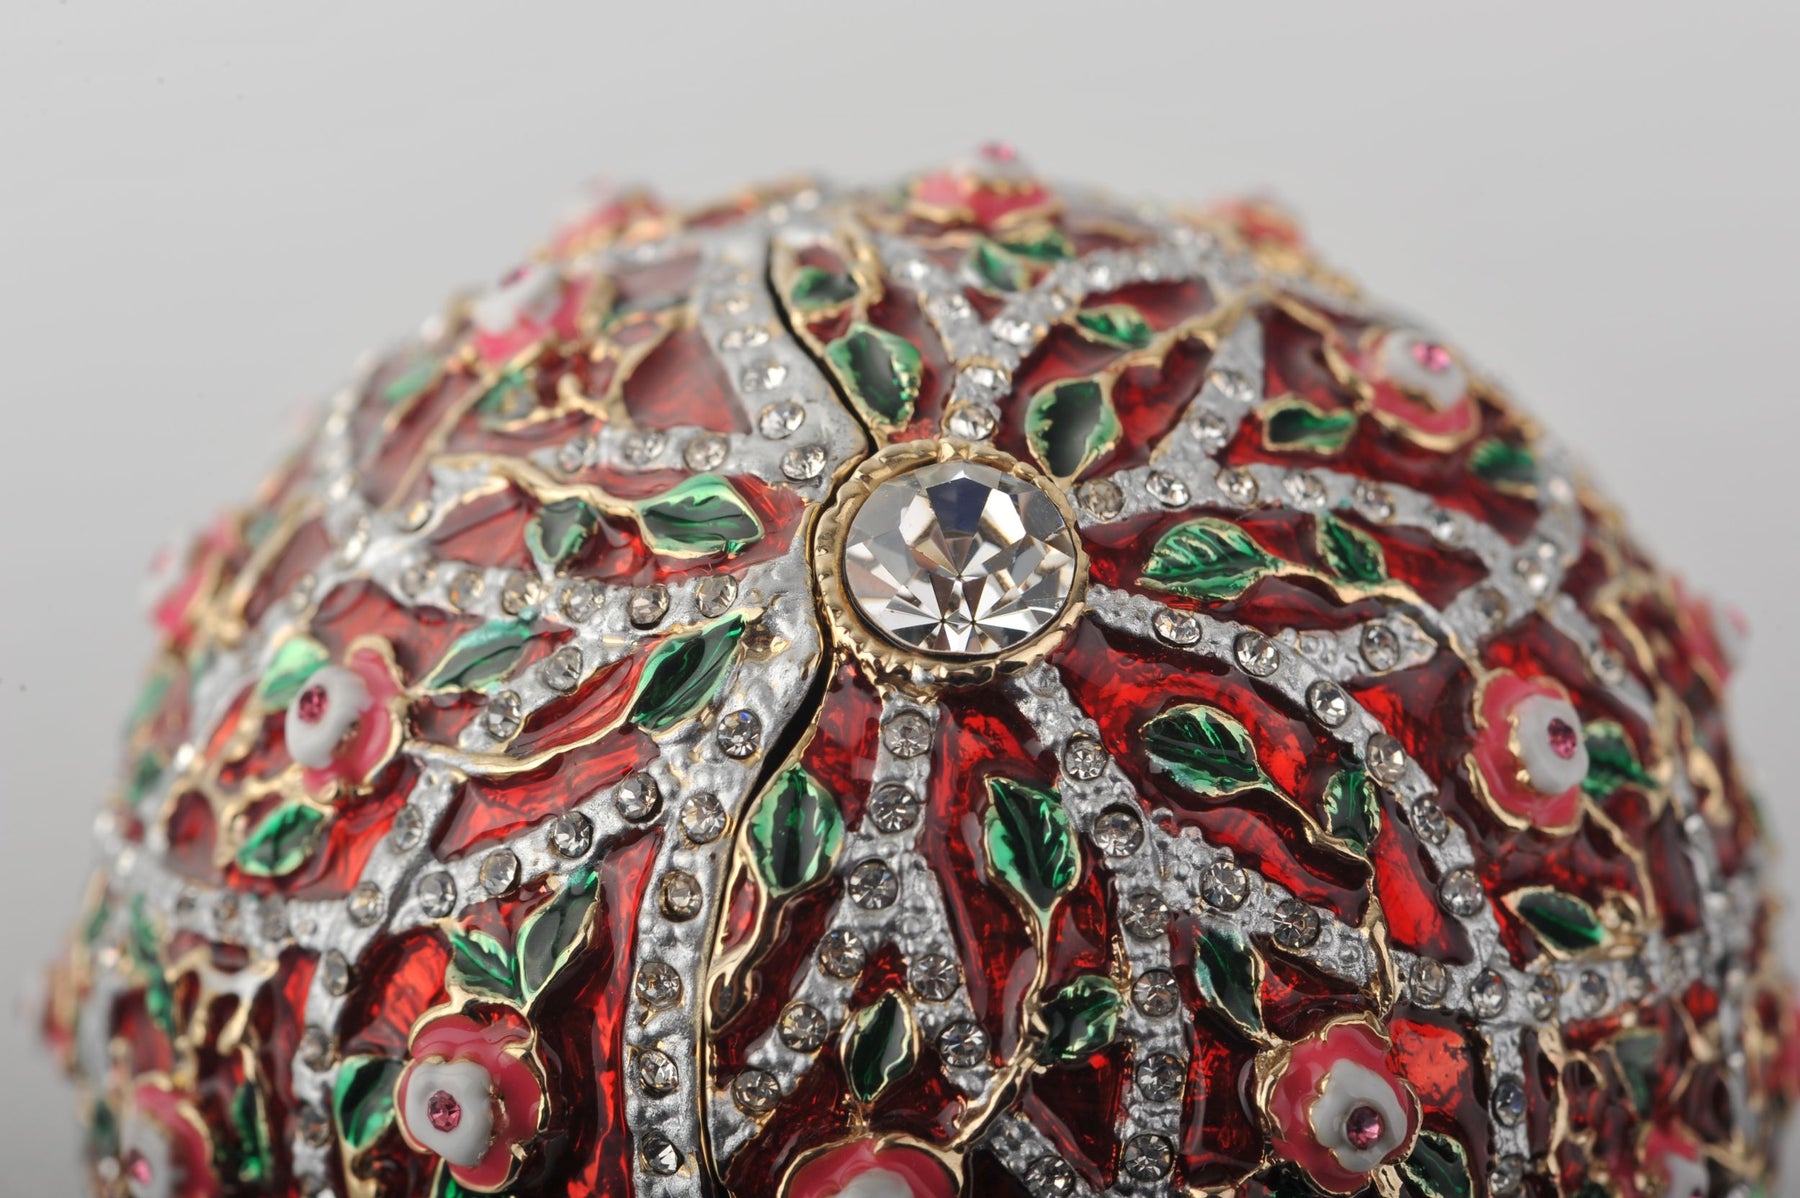 Red Roses Faberge Egg With a Surprise Colorful Ball Inside